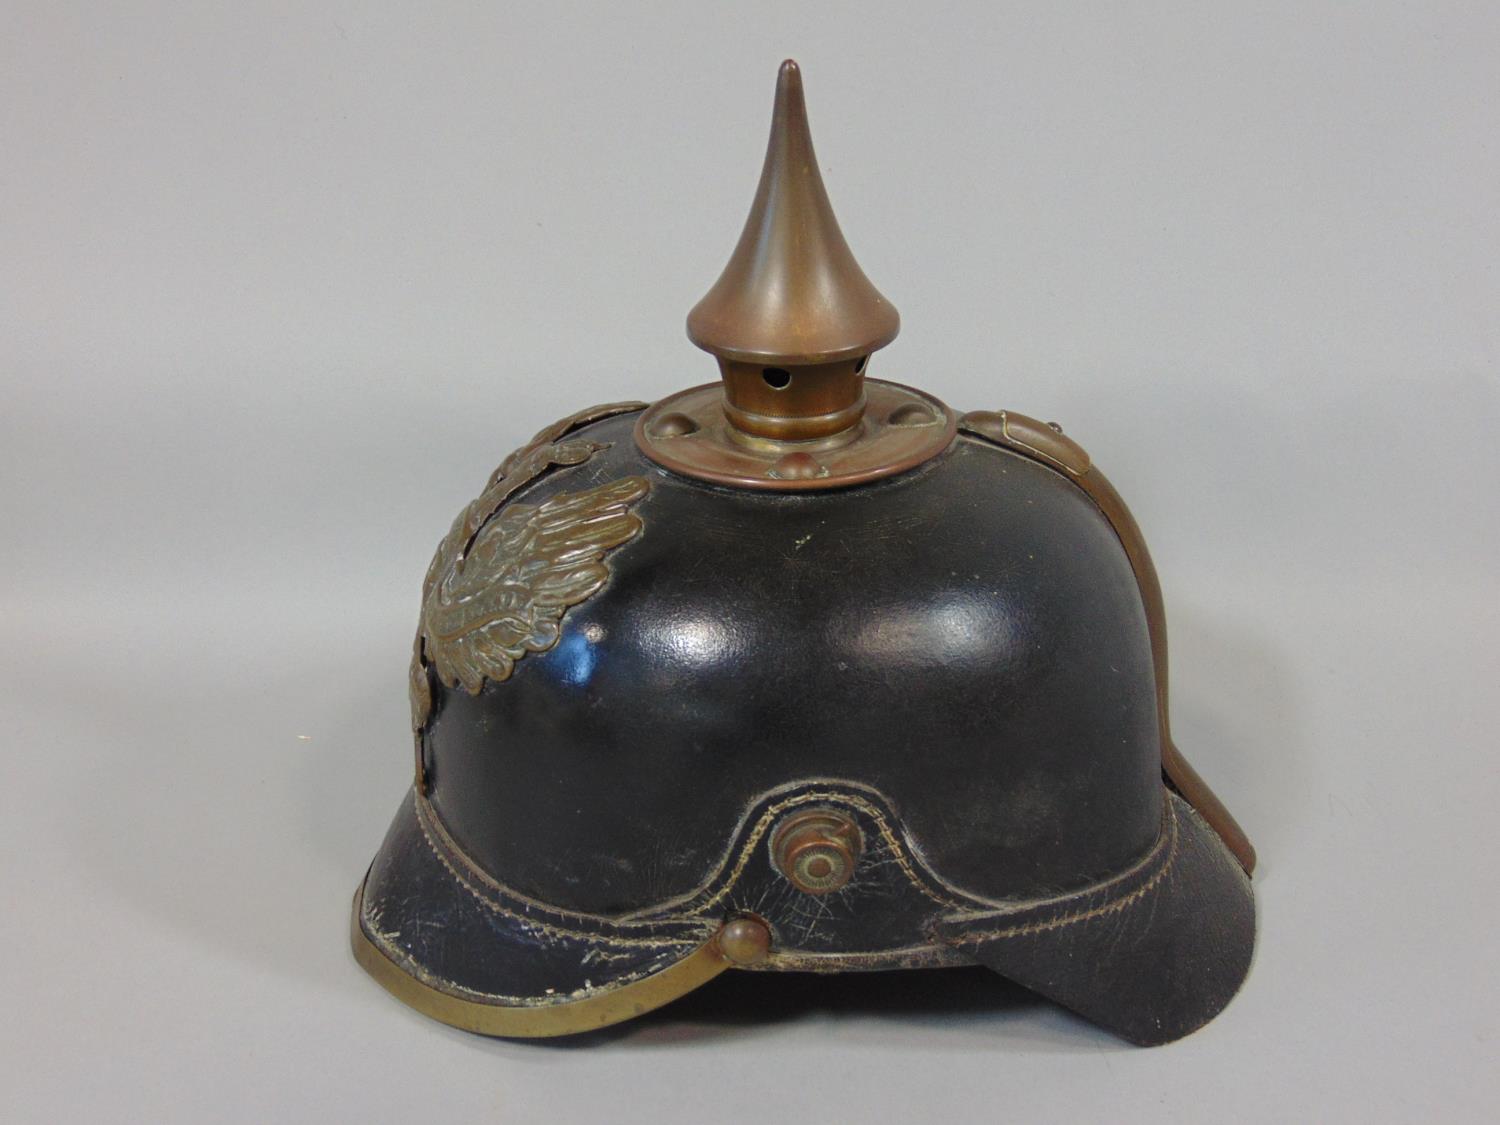 19th century German/Pussian Picklehaube helmet in black leather with a brass spike and applied crest - Image 2 of 5